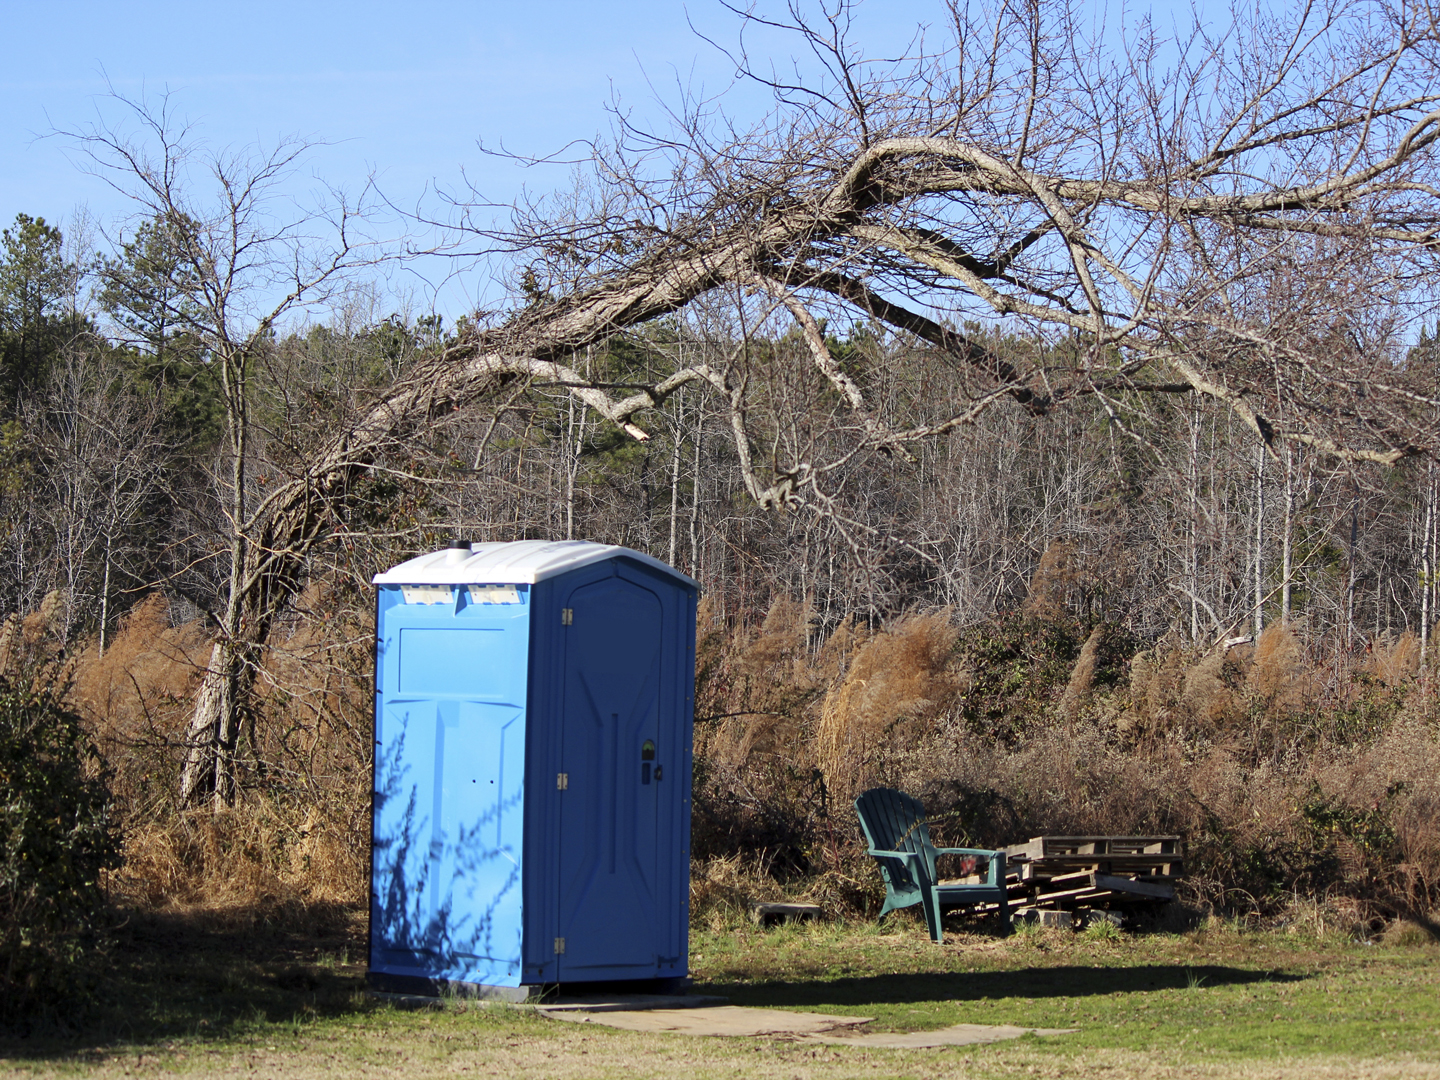 This portable toilet is located near a hobby airport.